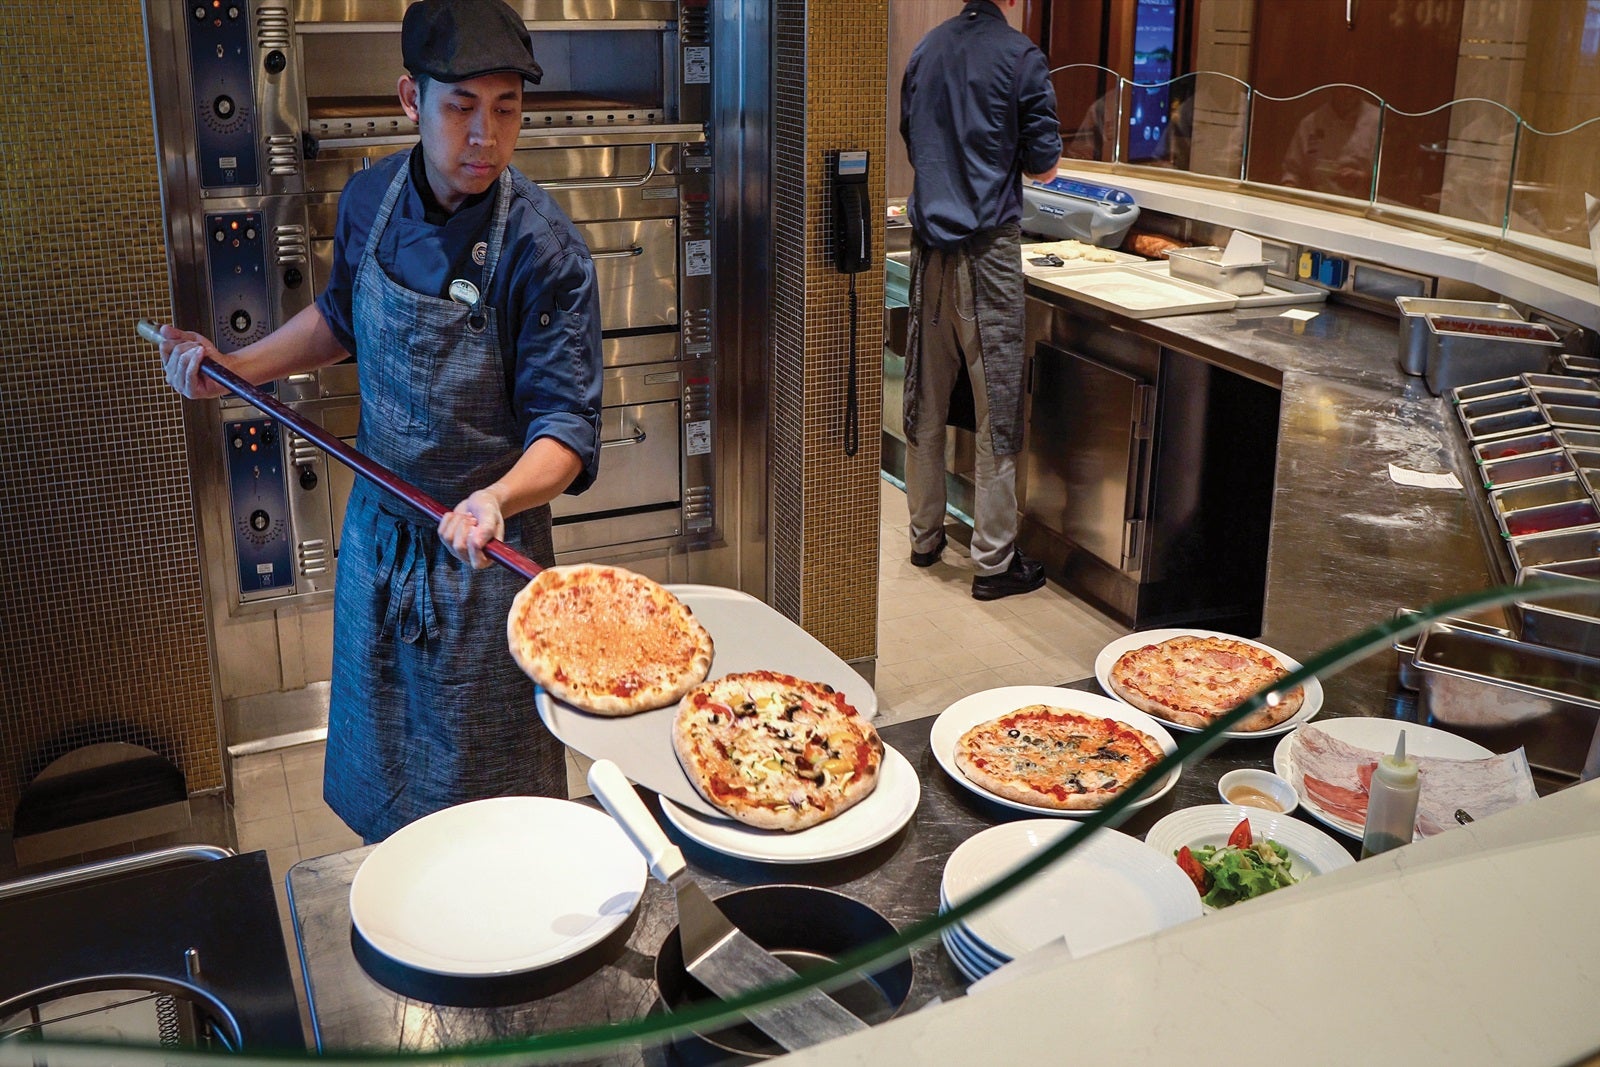 A crew member plates pizzas at Alfredo's on Sky Princess